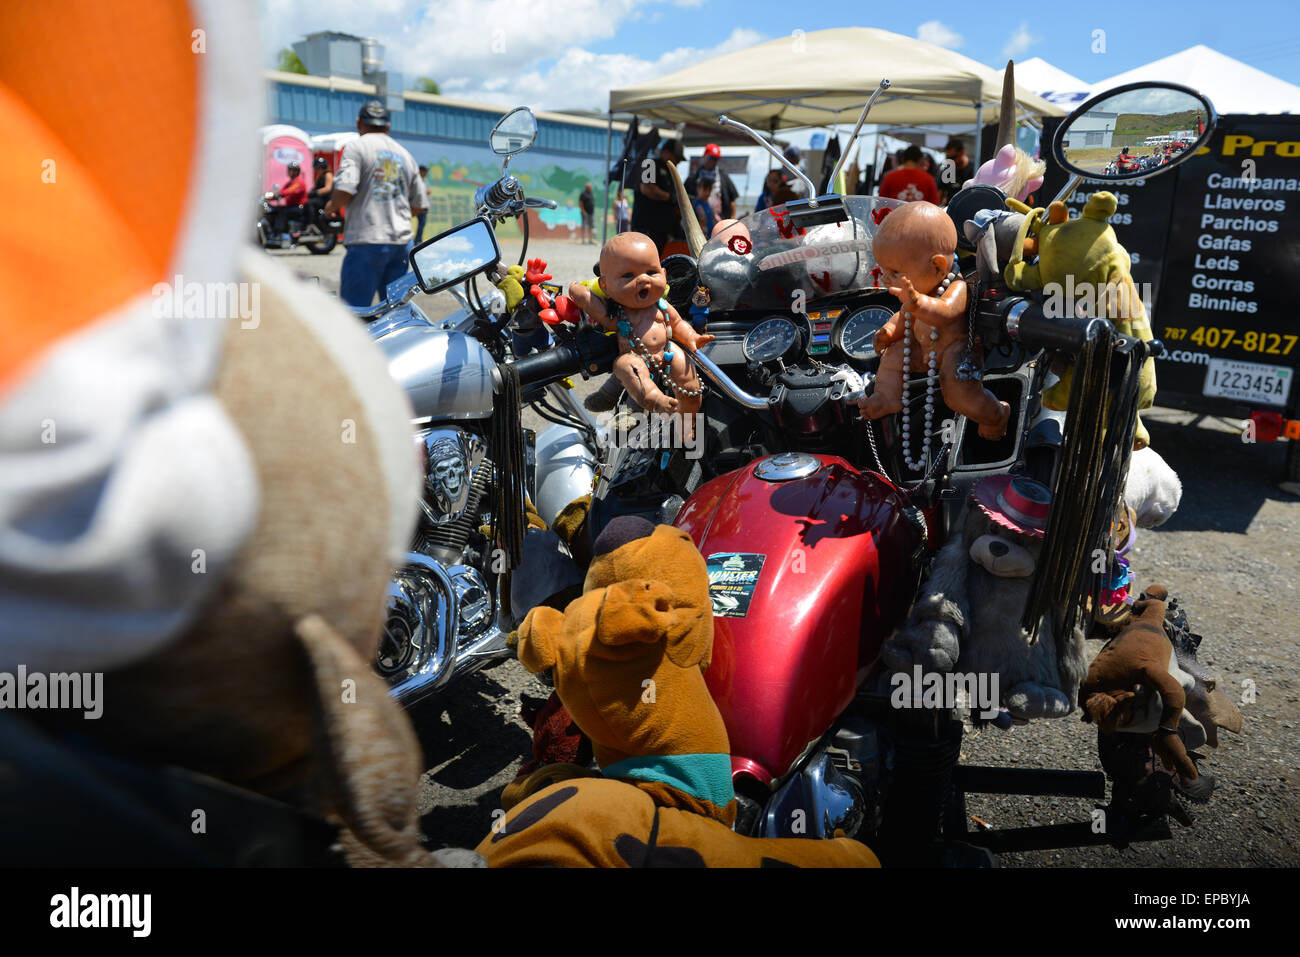 Detail of a motorcycle at a bike event in Ponce, Puerto Rico. Caribbean Island. USA territory. Stock Photo